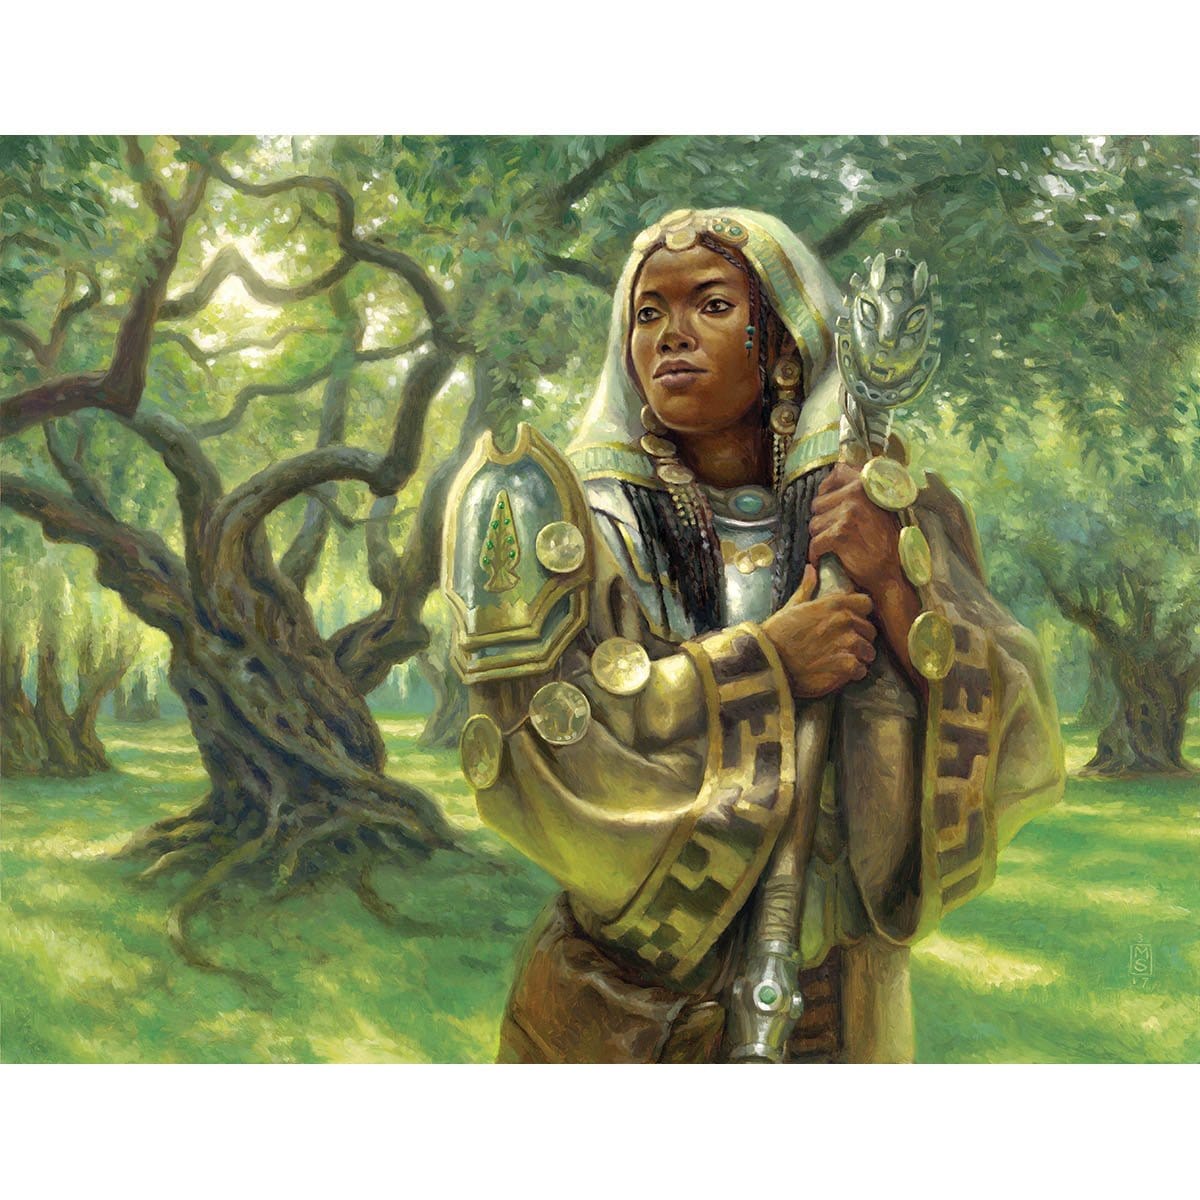 Noble Hierarch Print - Print - Original Magic Art - Accessories for Magic the Gathering and other card games